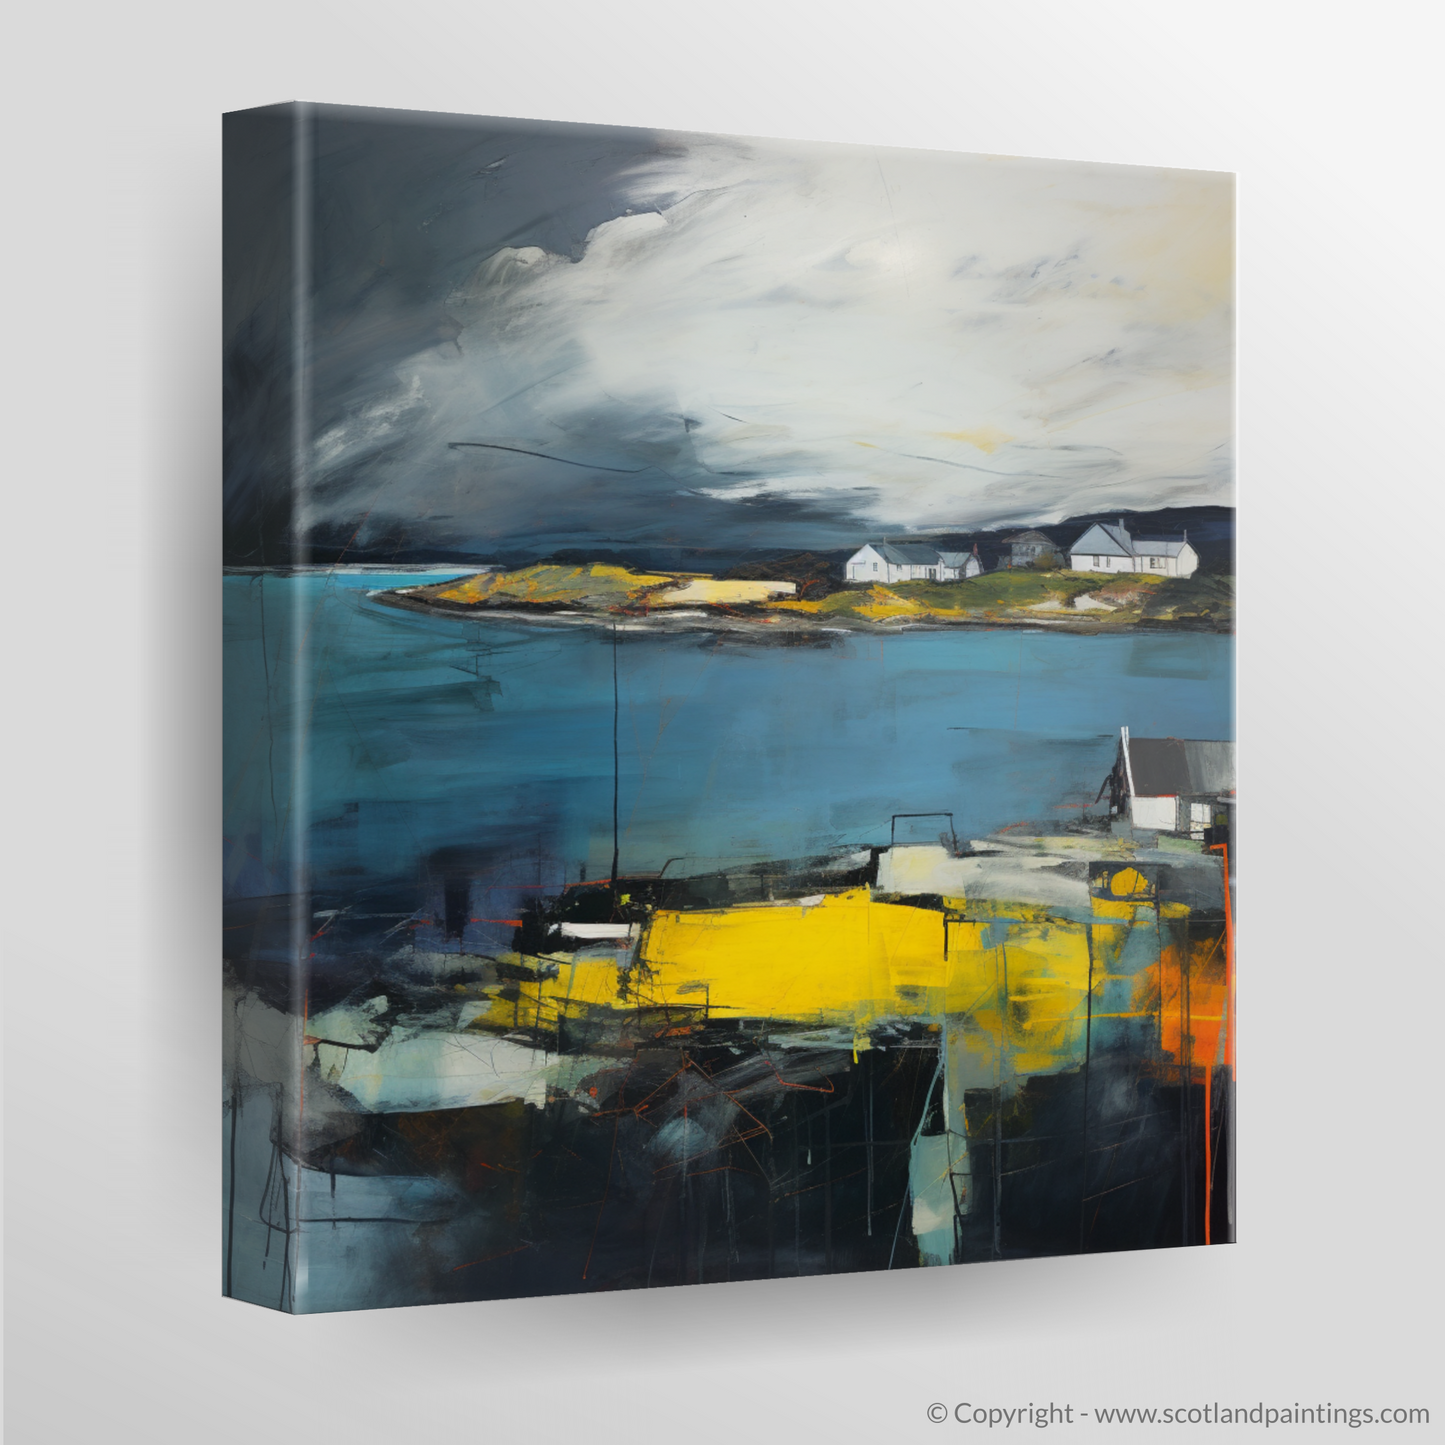 Storm over Gairloch Harbour: An Abstract Impressionist Odyssey